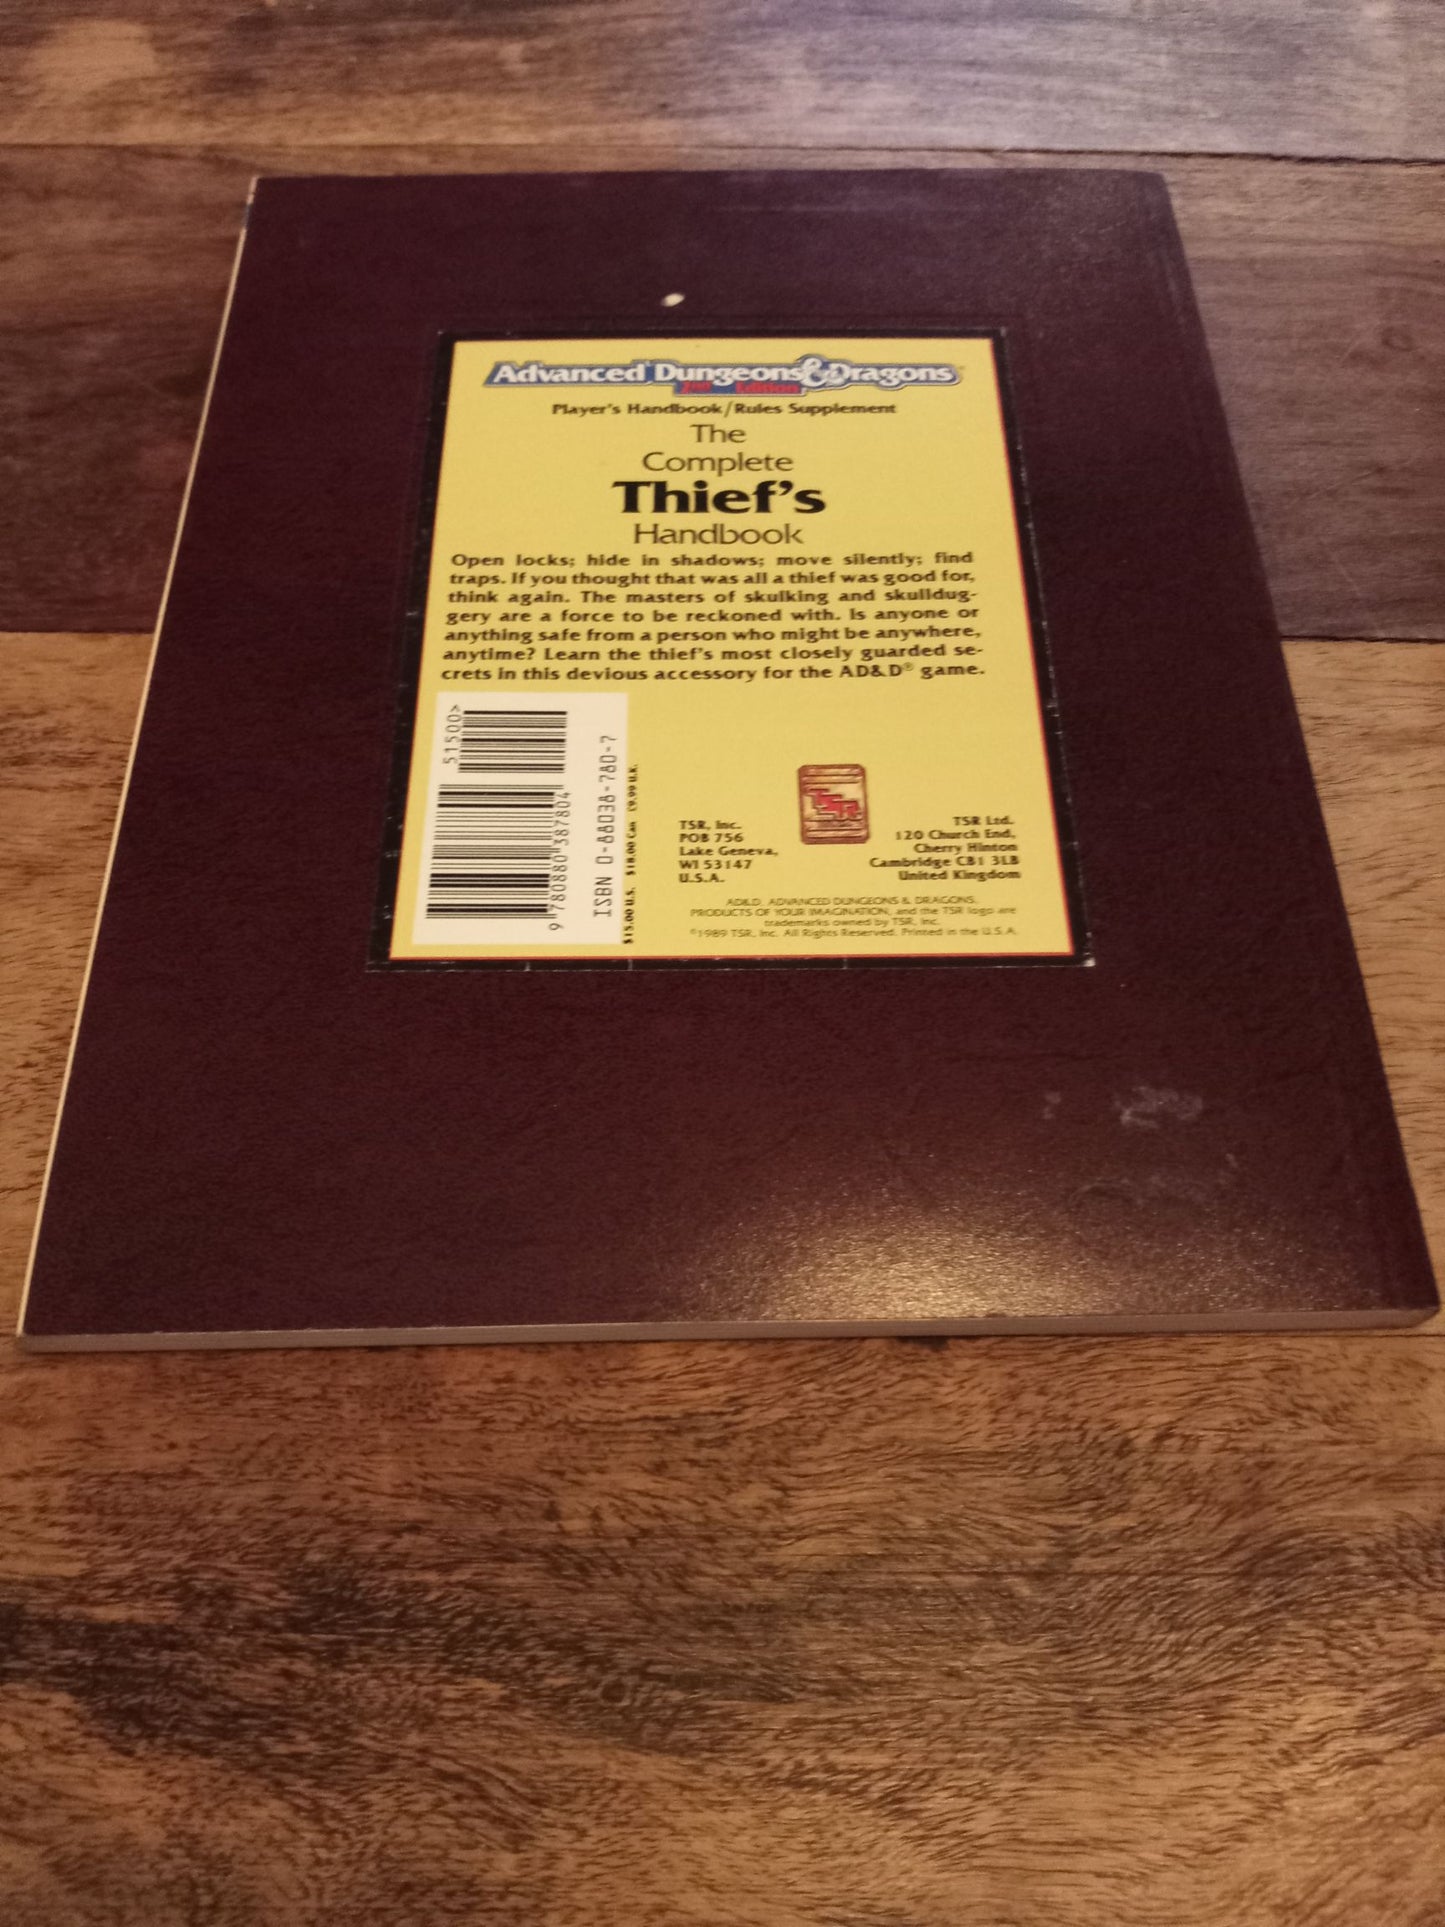 The Complete Thief's Handbook Advanced Dungeons & Dragons TSR AD&D